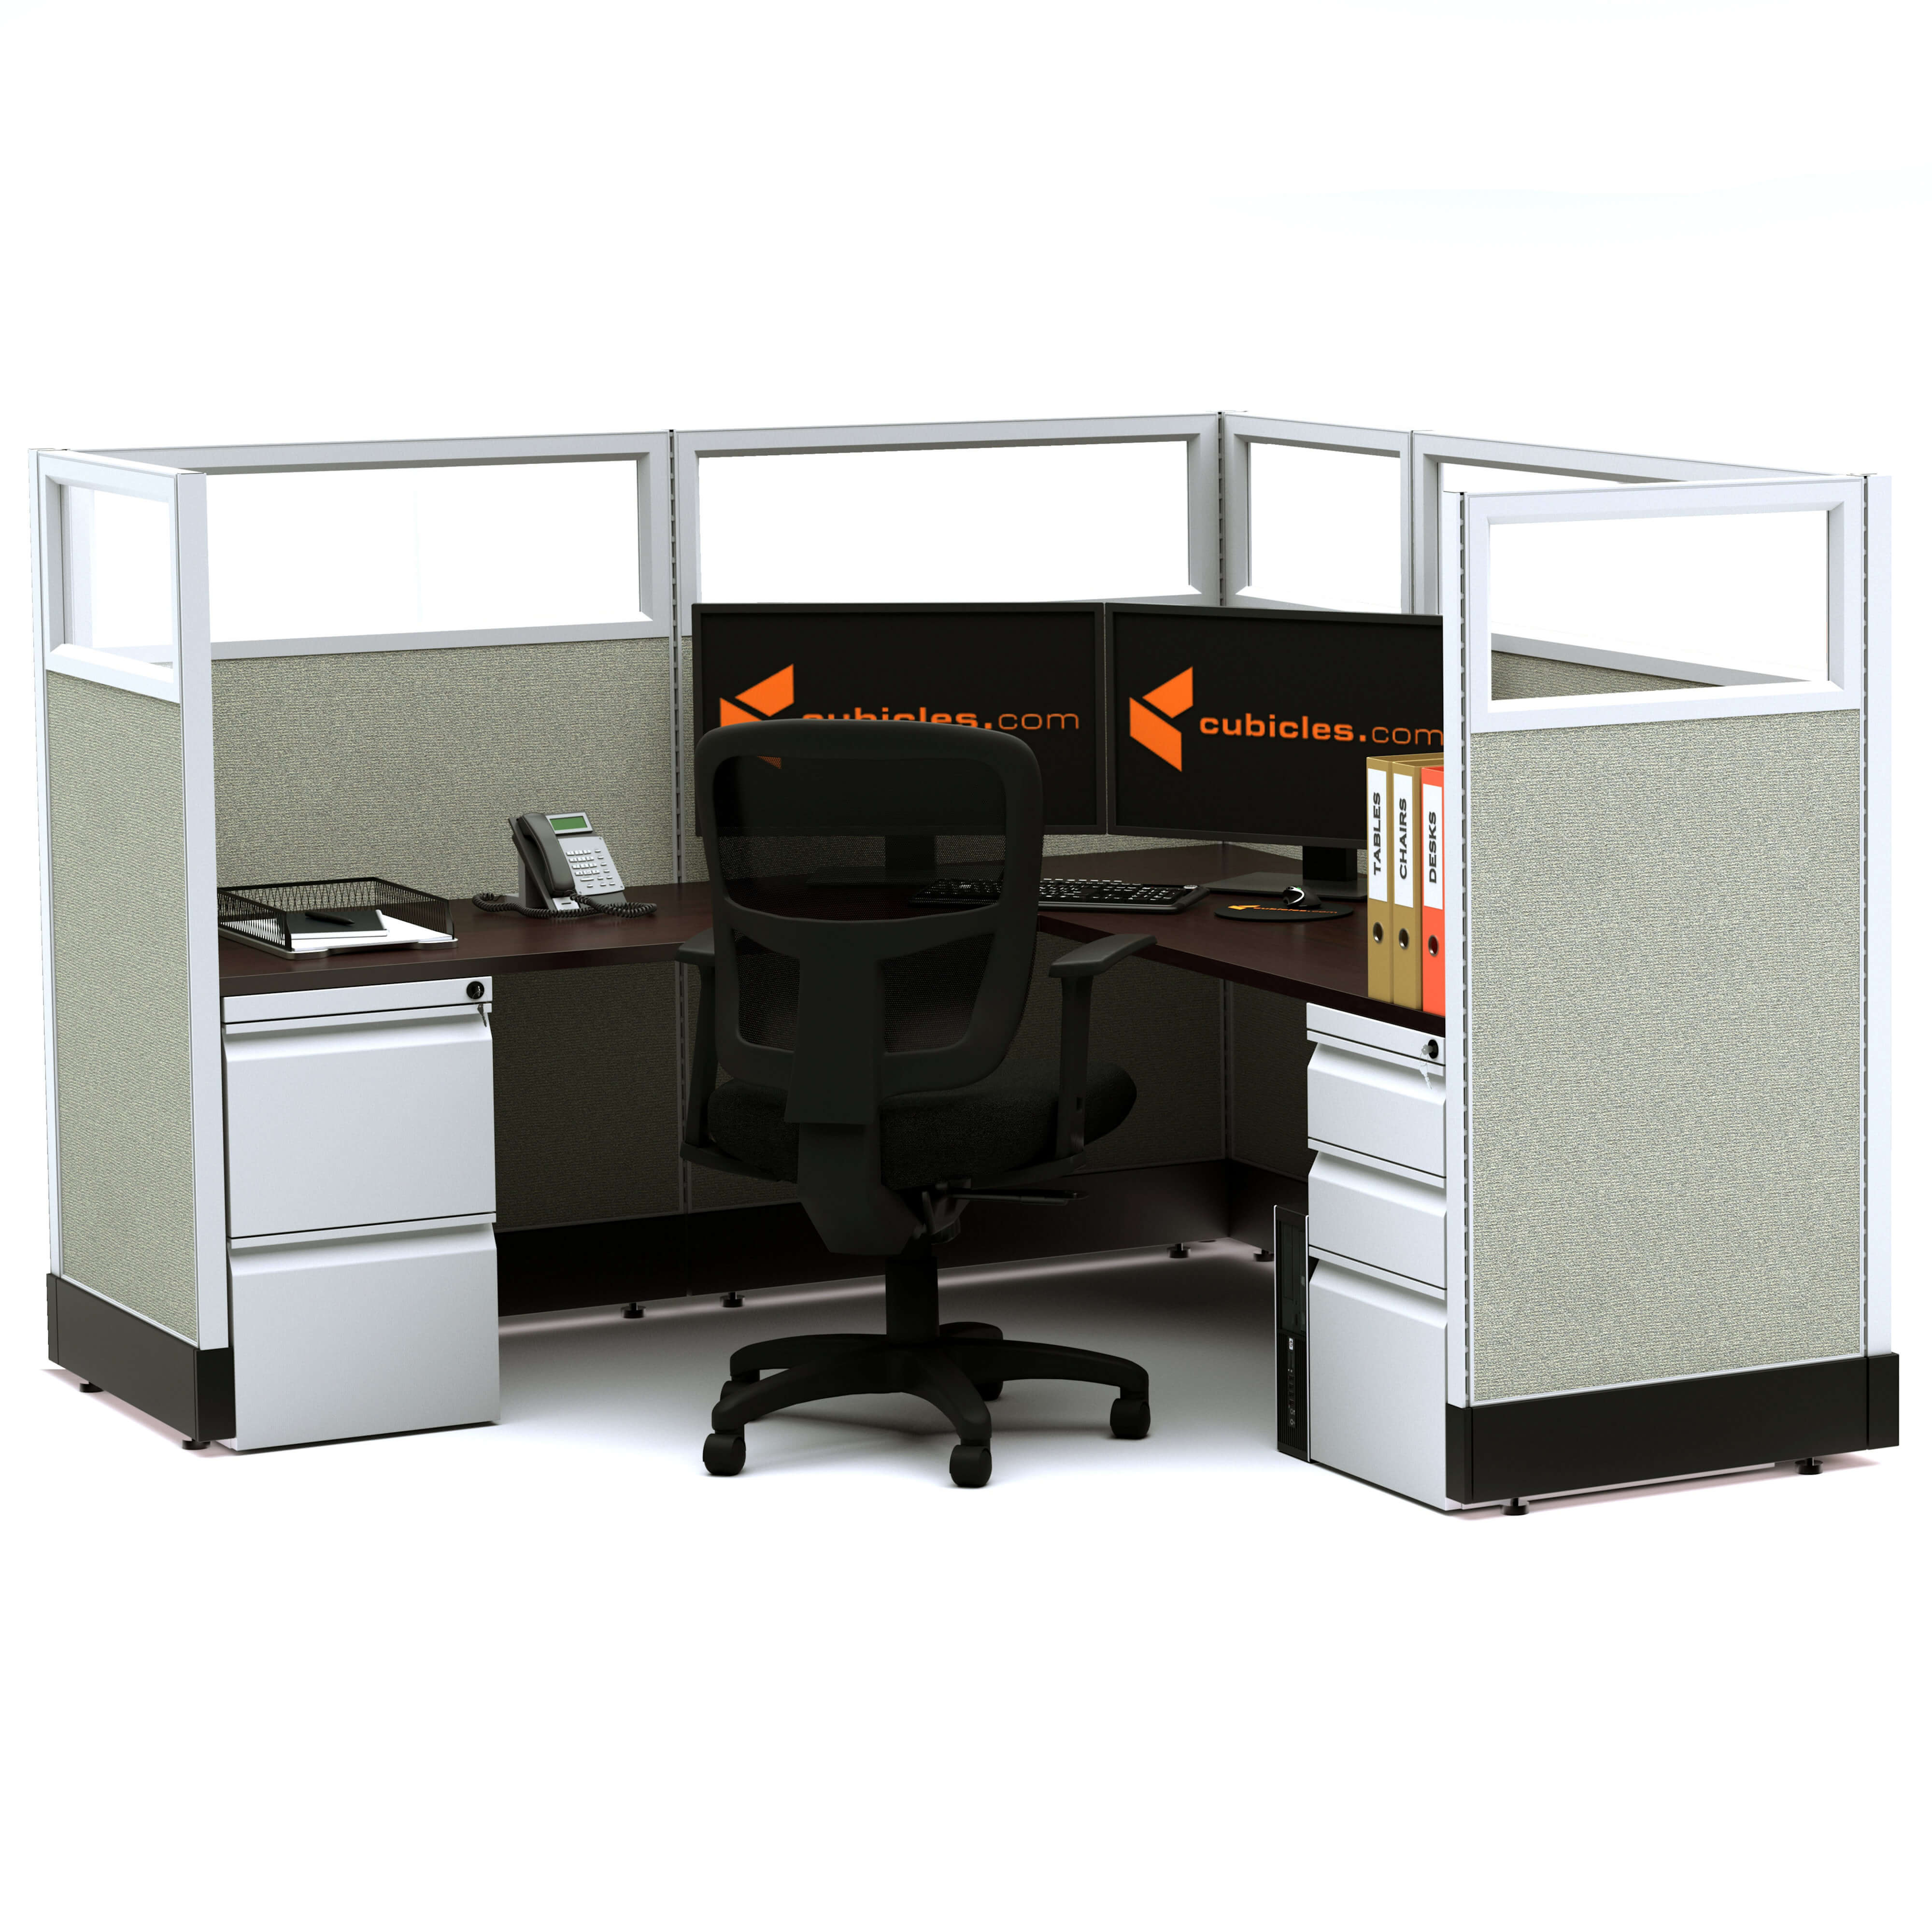 Modular office furniture glass office cubicles single powered